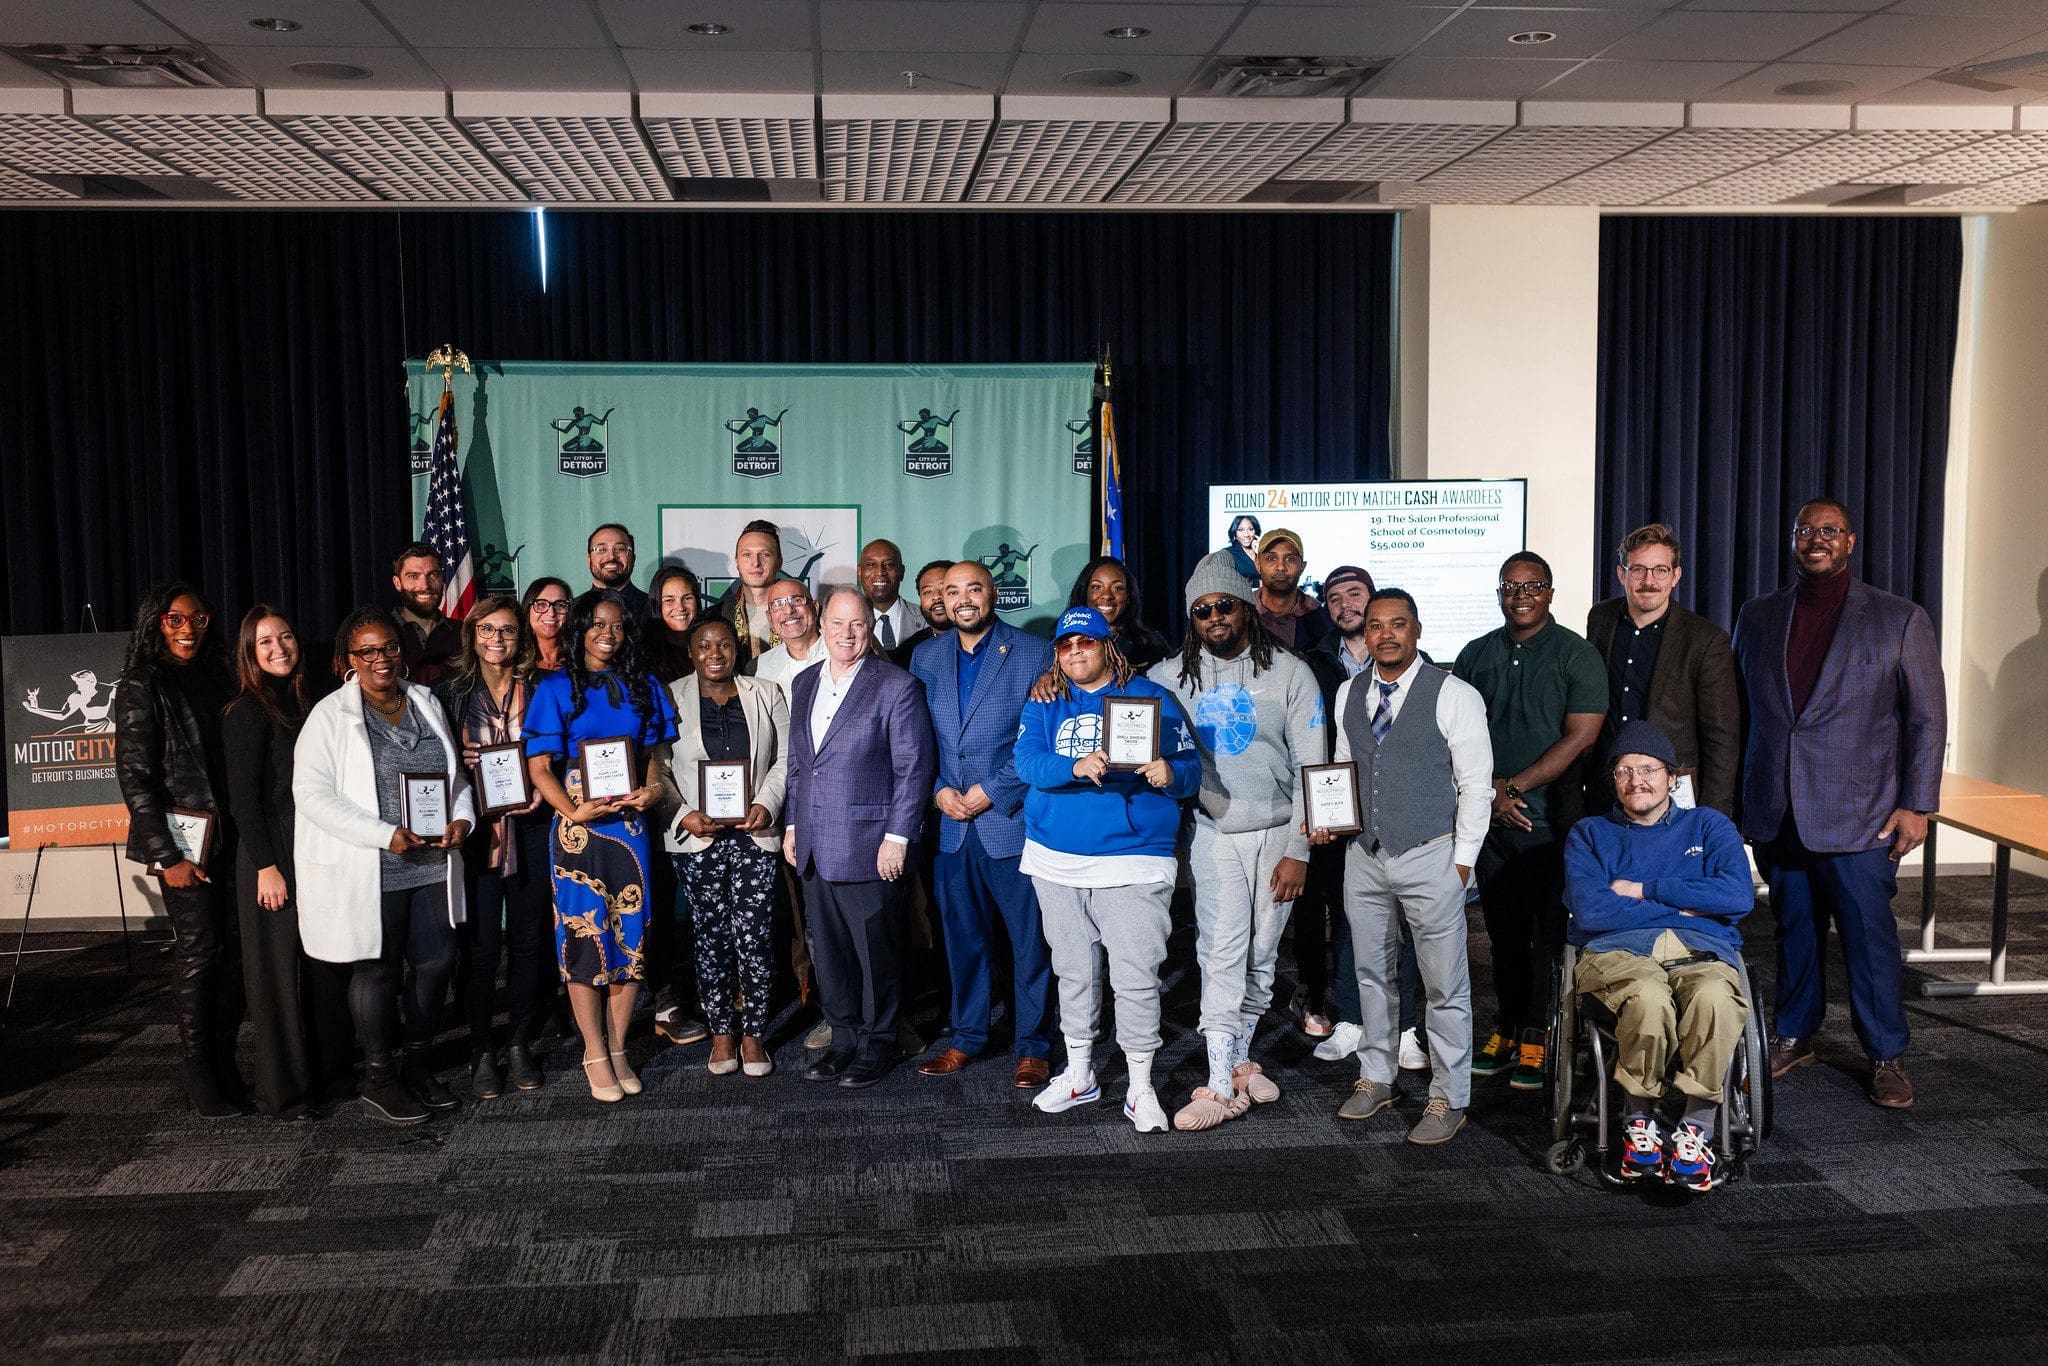 19 new small businesses to open in Detroit, thanks to $1M in Motor City Match Round 24 grants